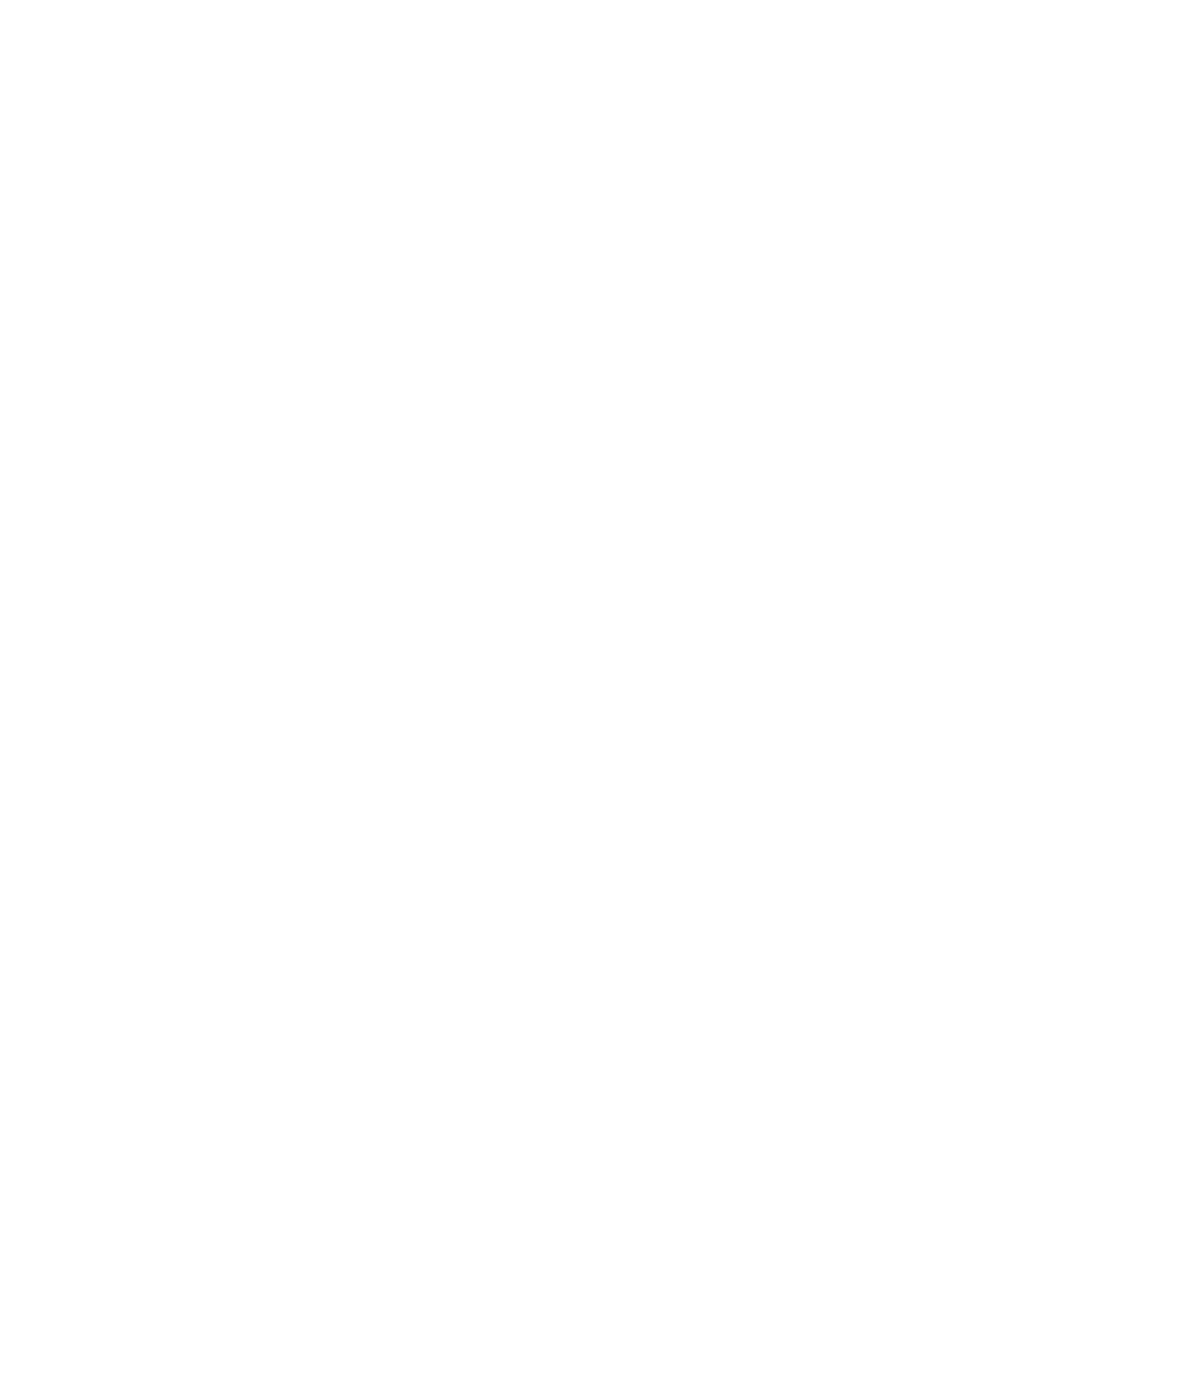 Travelers Choice, Best of the Best